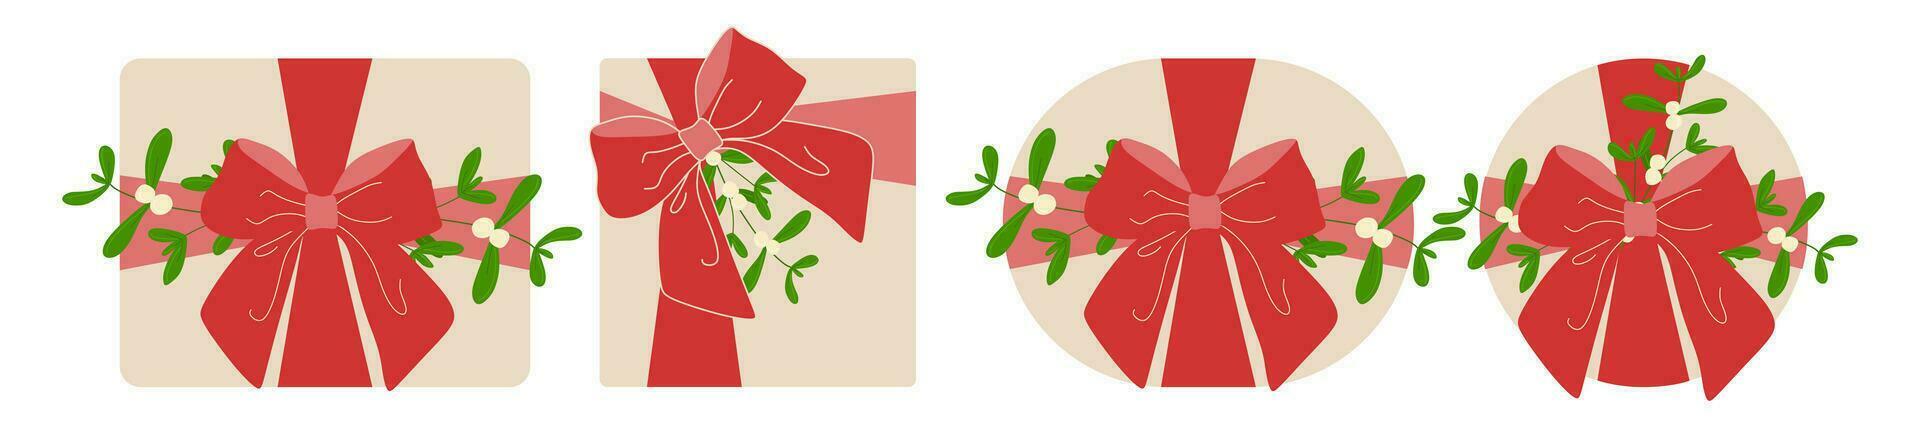 Set of vector Hands Holding Christmas gifts. Collection of Wrapped Holiday boxes with Red ribbon bow and Mistletoe branches. Flat illustration isolated on white background. Present party concept